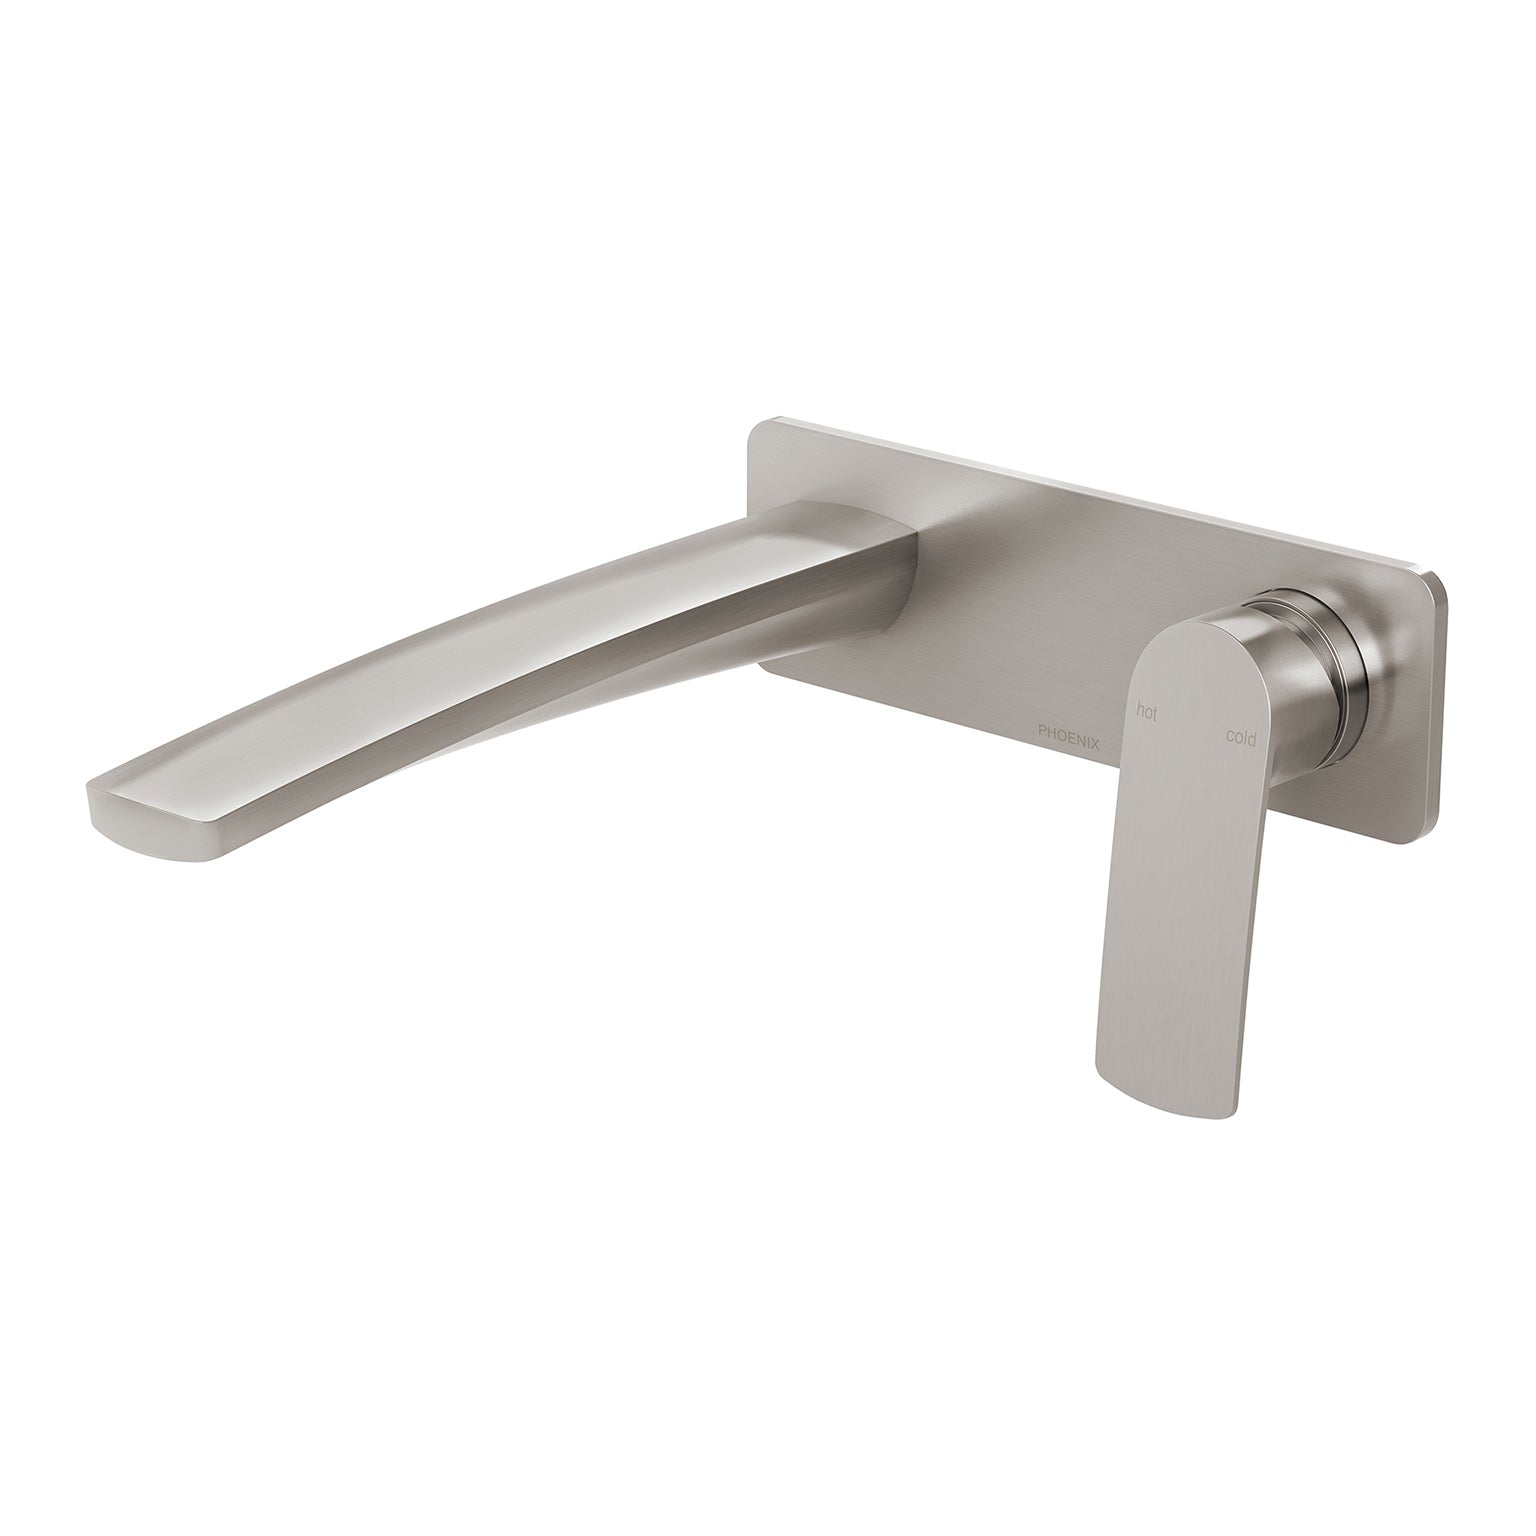 PHOENIX MEKKO SWITCHMIX WALL BASIN / BATH MIXER SET FIT-OFF AND ROUGH-IN KIT 200MM BRUSHED NICKEL